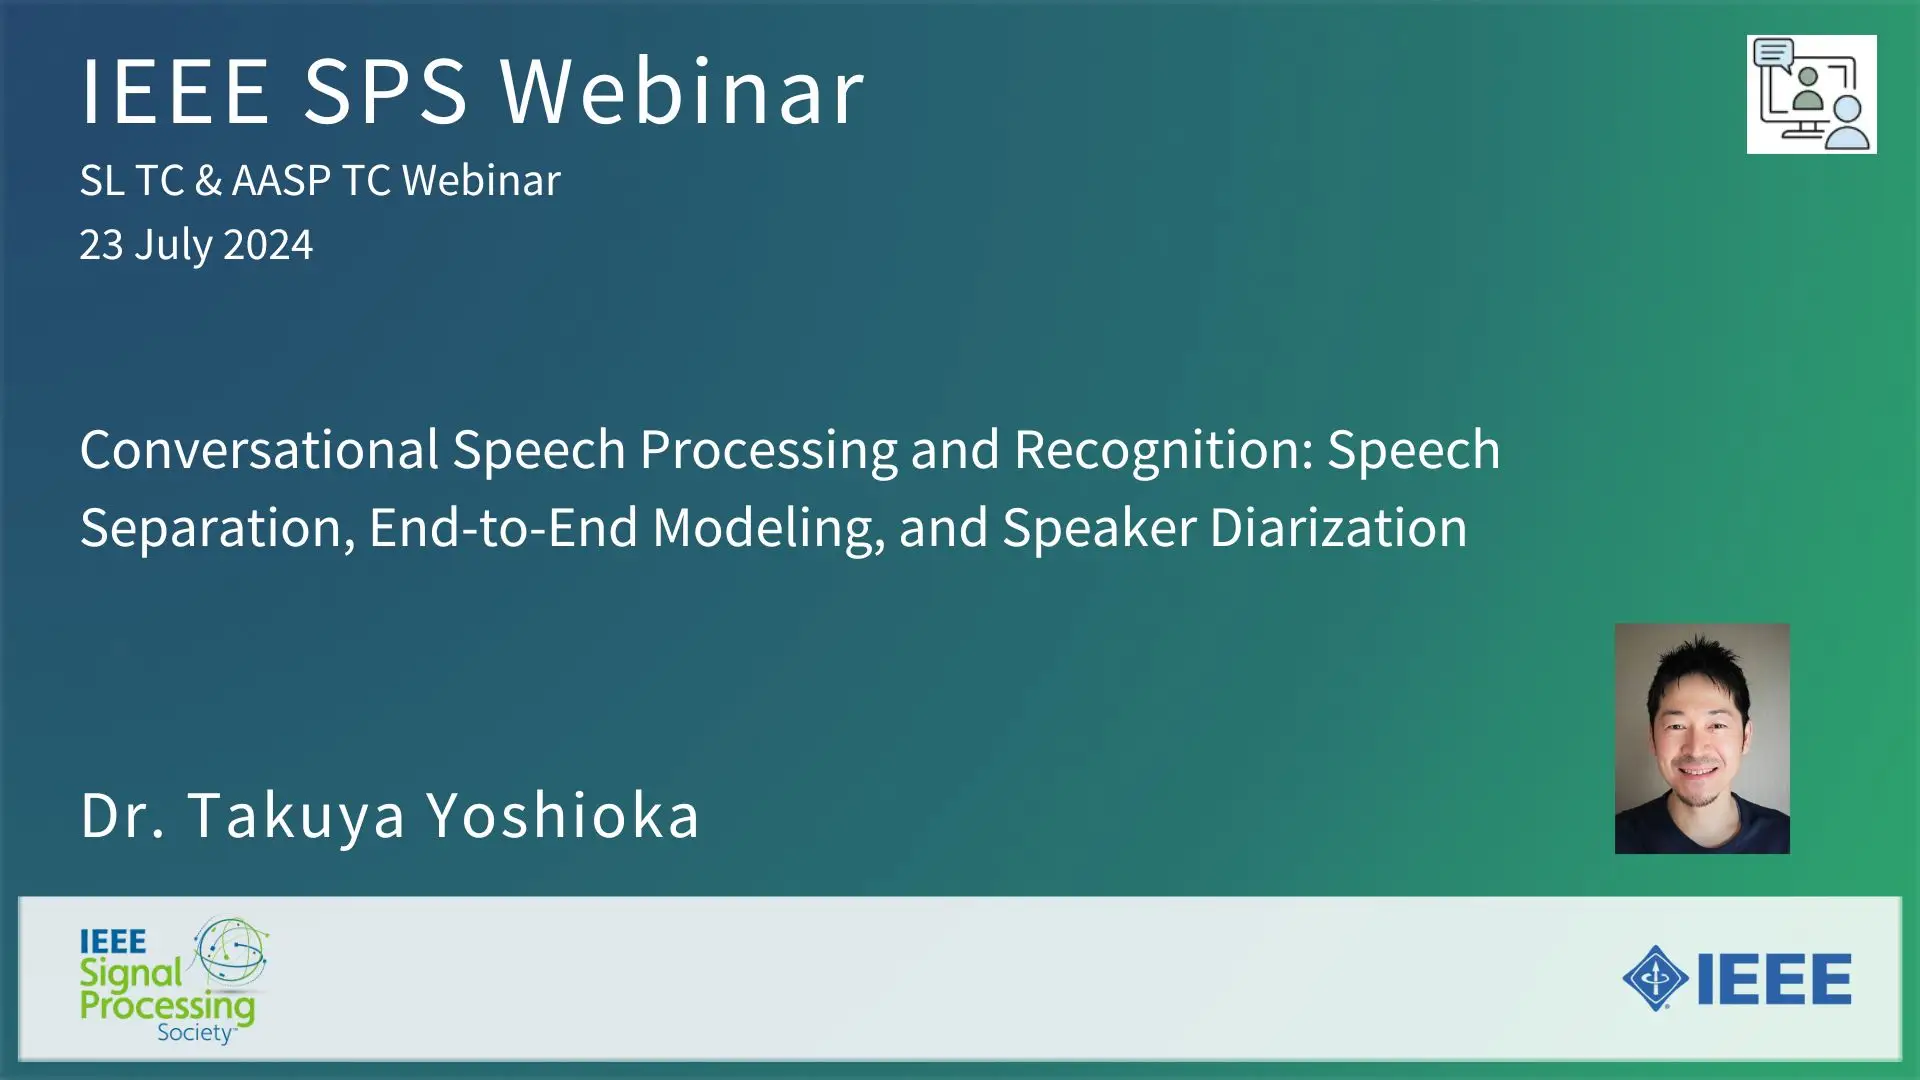 Conversational Speech Processing and Recognition: Speech Separation, End-to-End Modeling, and Speaker Diarization